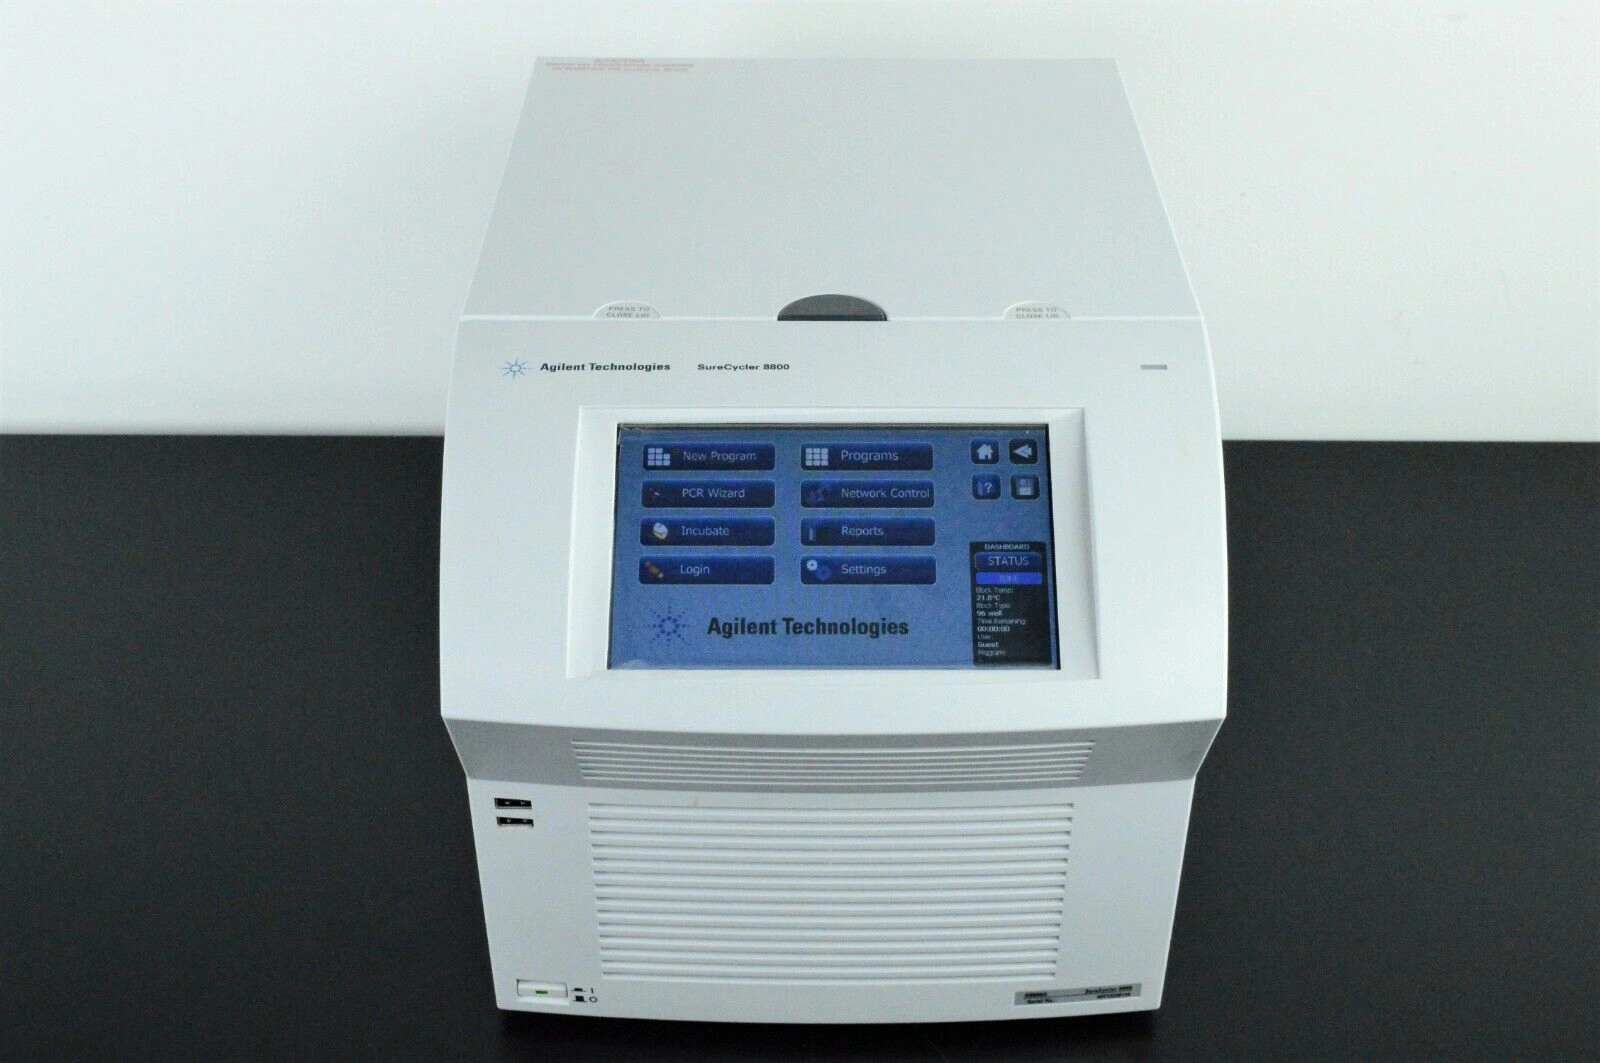 Agilent SureCycler 8800 PCR thermal cycler with 88